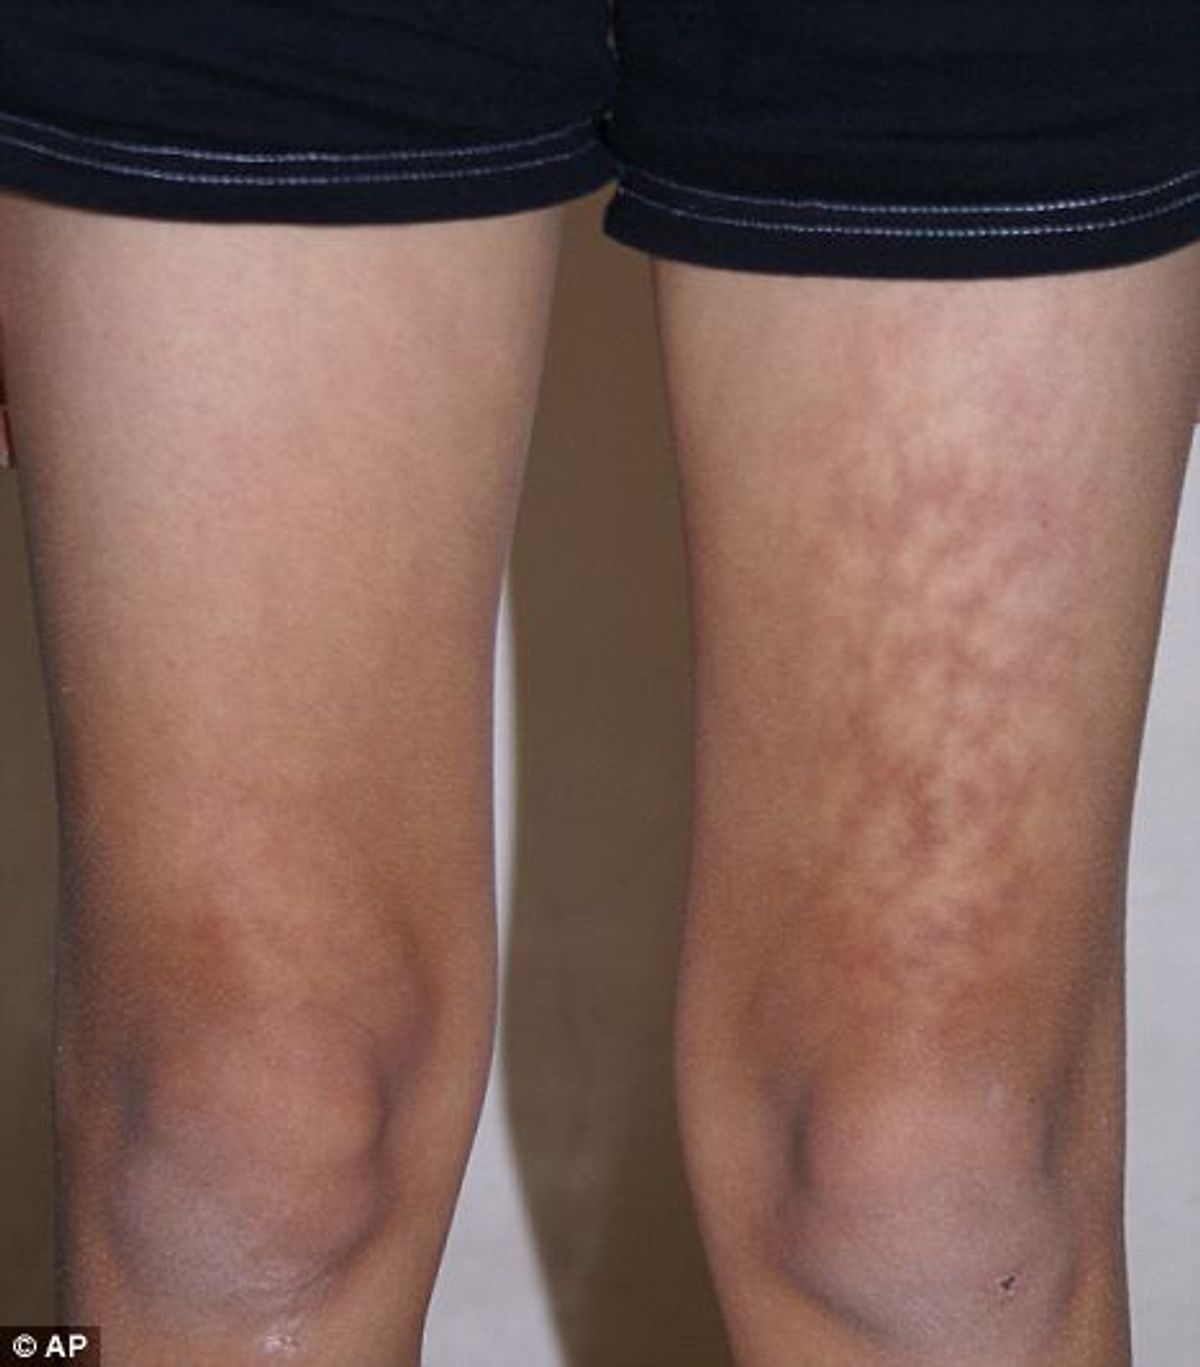 "Toasted Skin Syndrome" (© Ap)